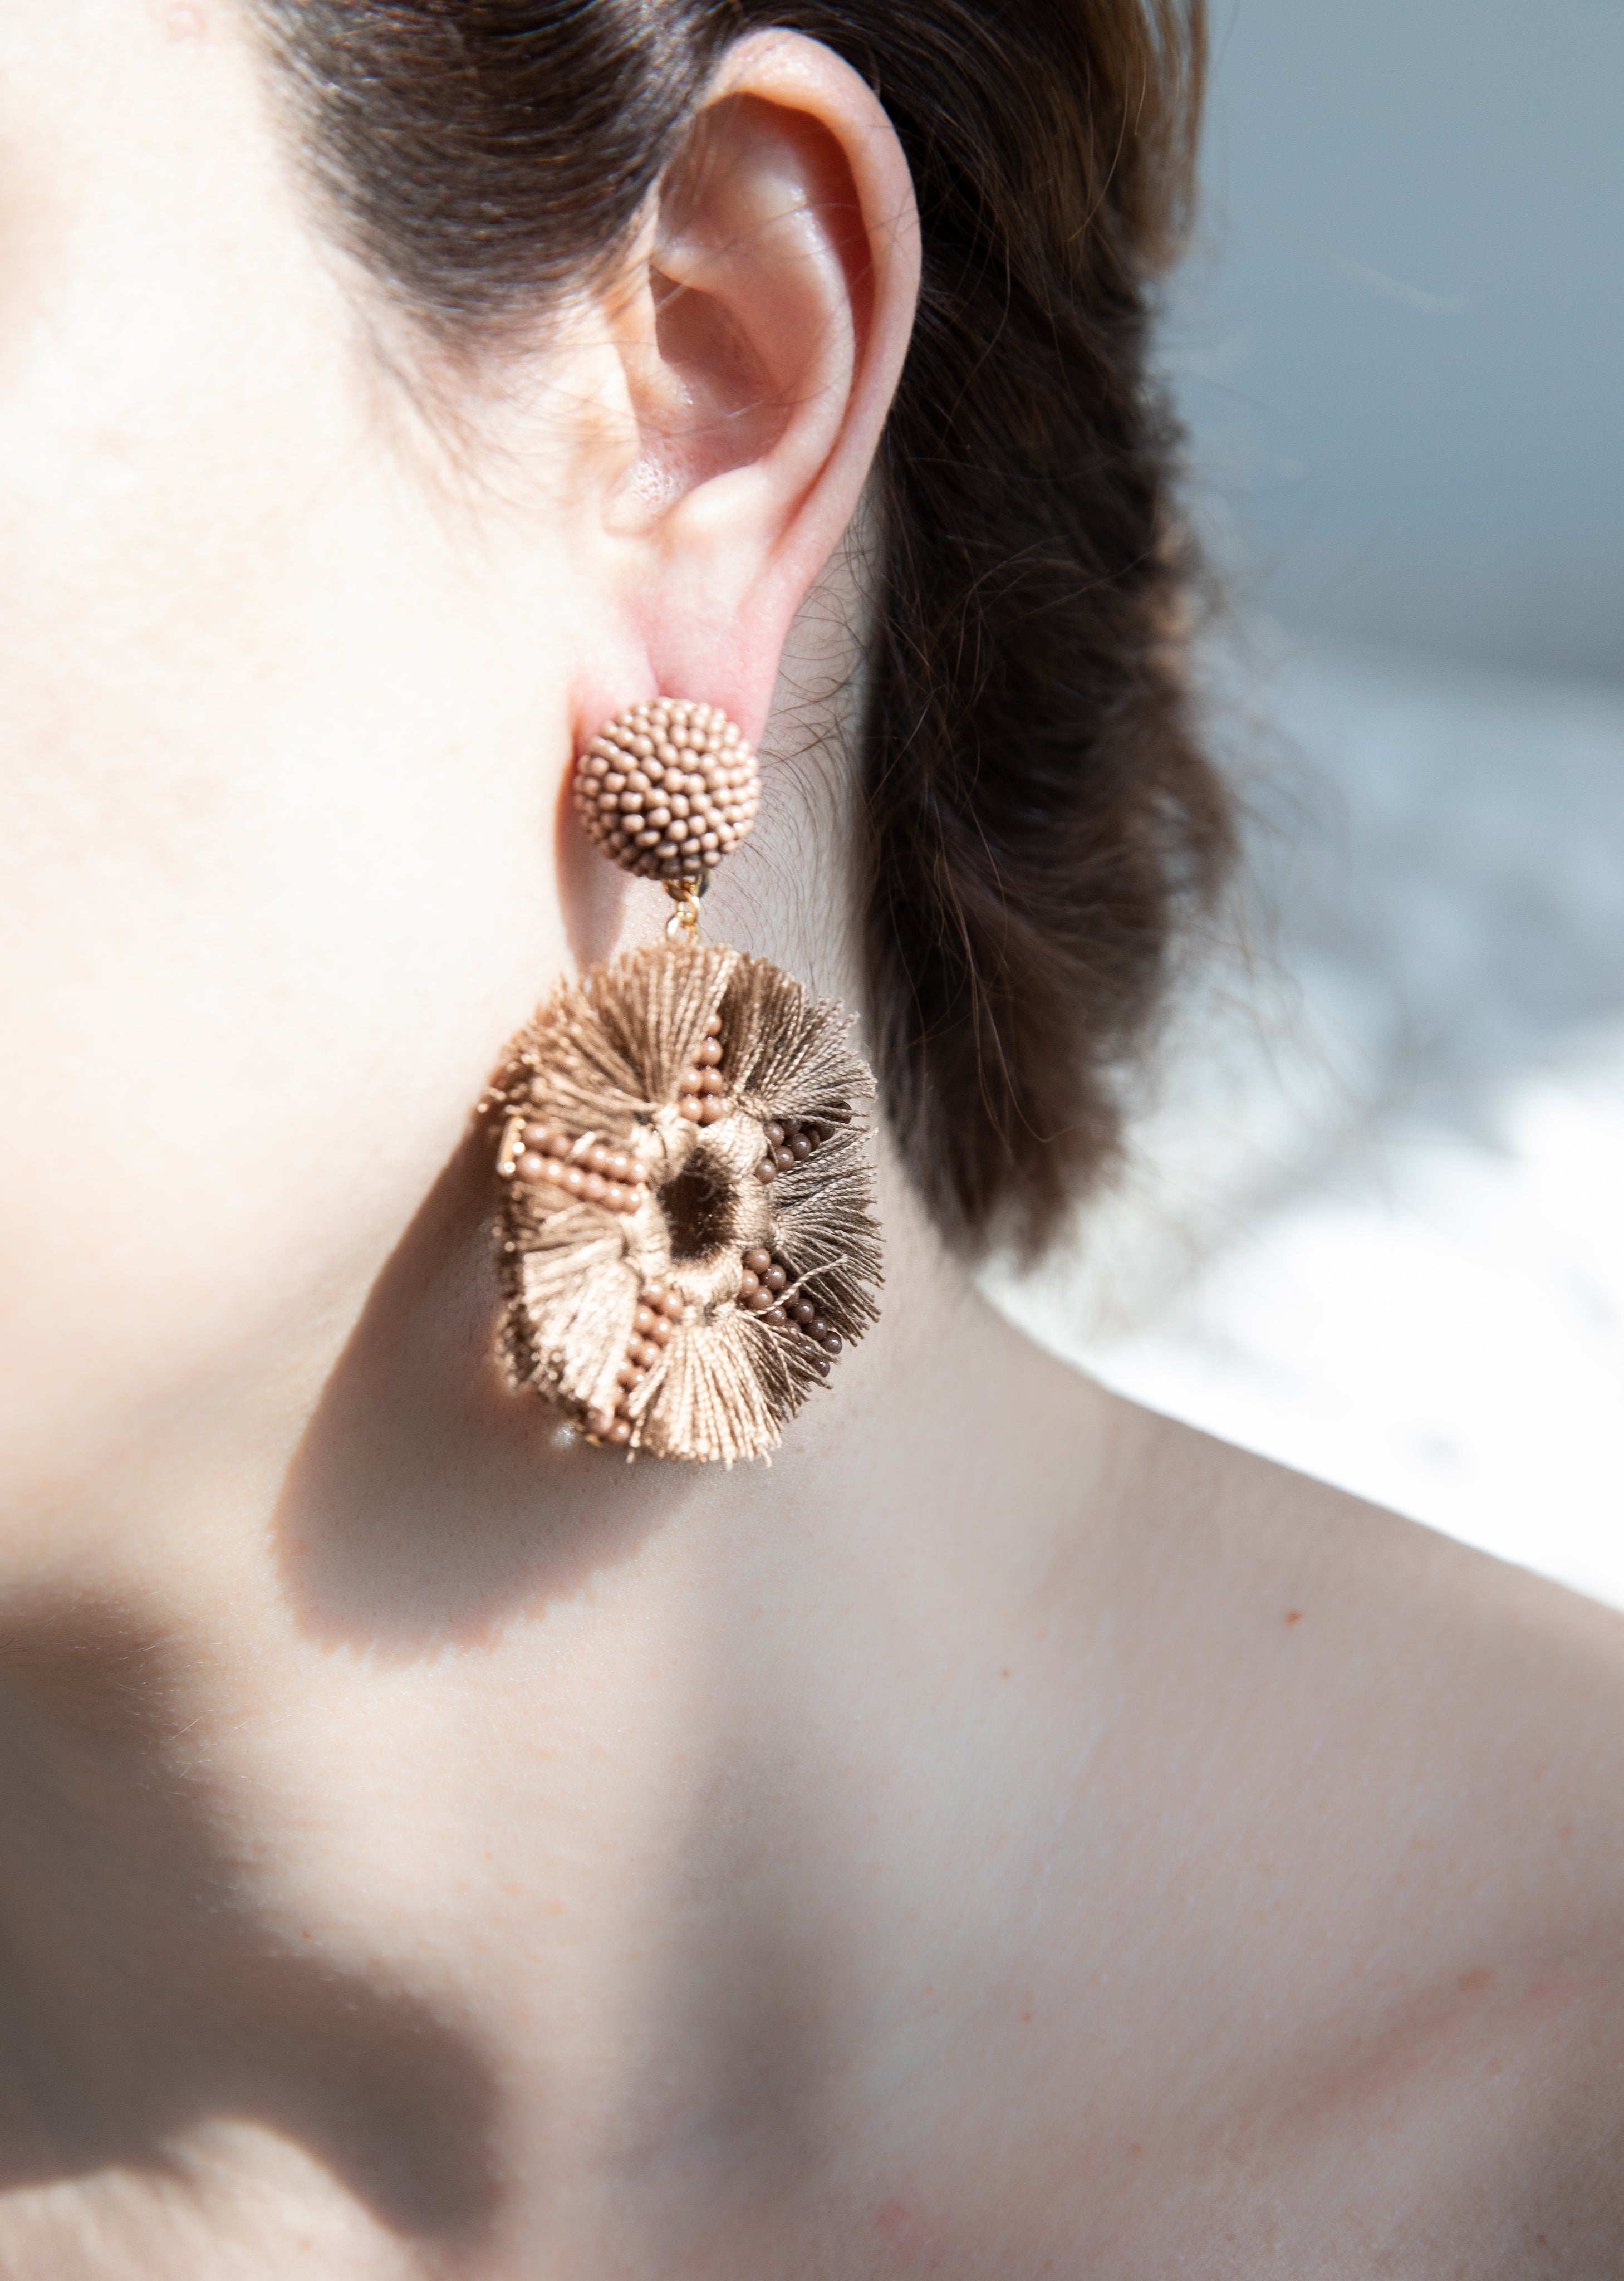 files/ear-close-up-with-a-light-brown-statement-earring.jpg